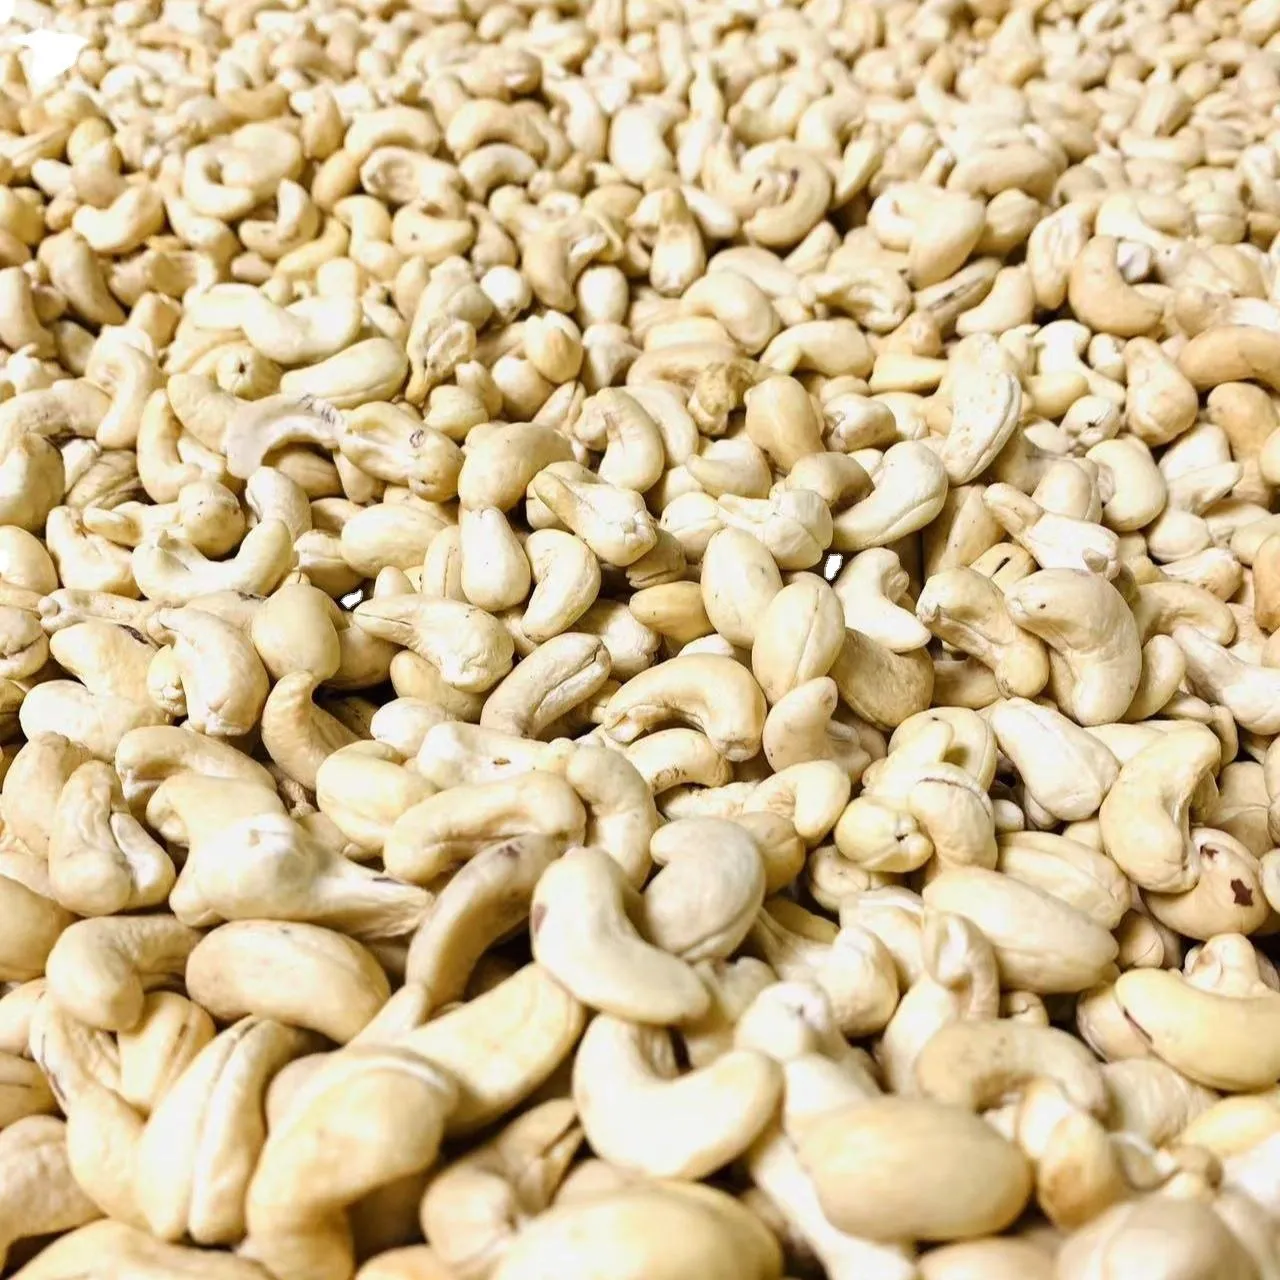 Cashew kernel market purchase price + quality test